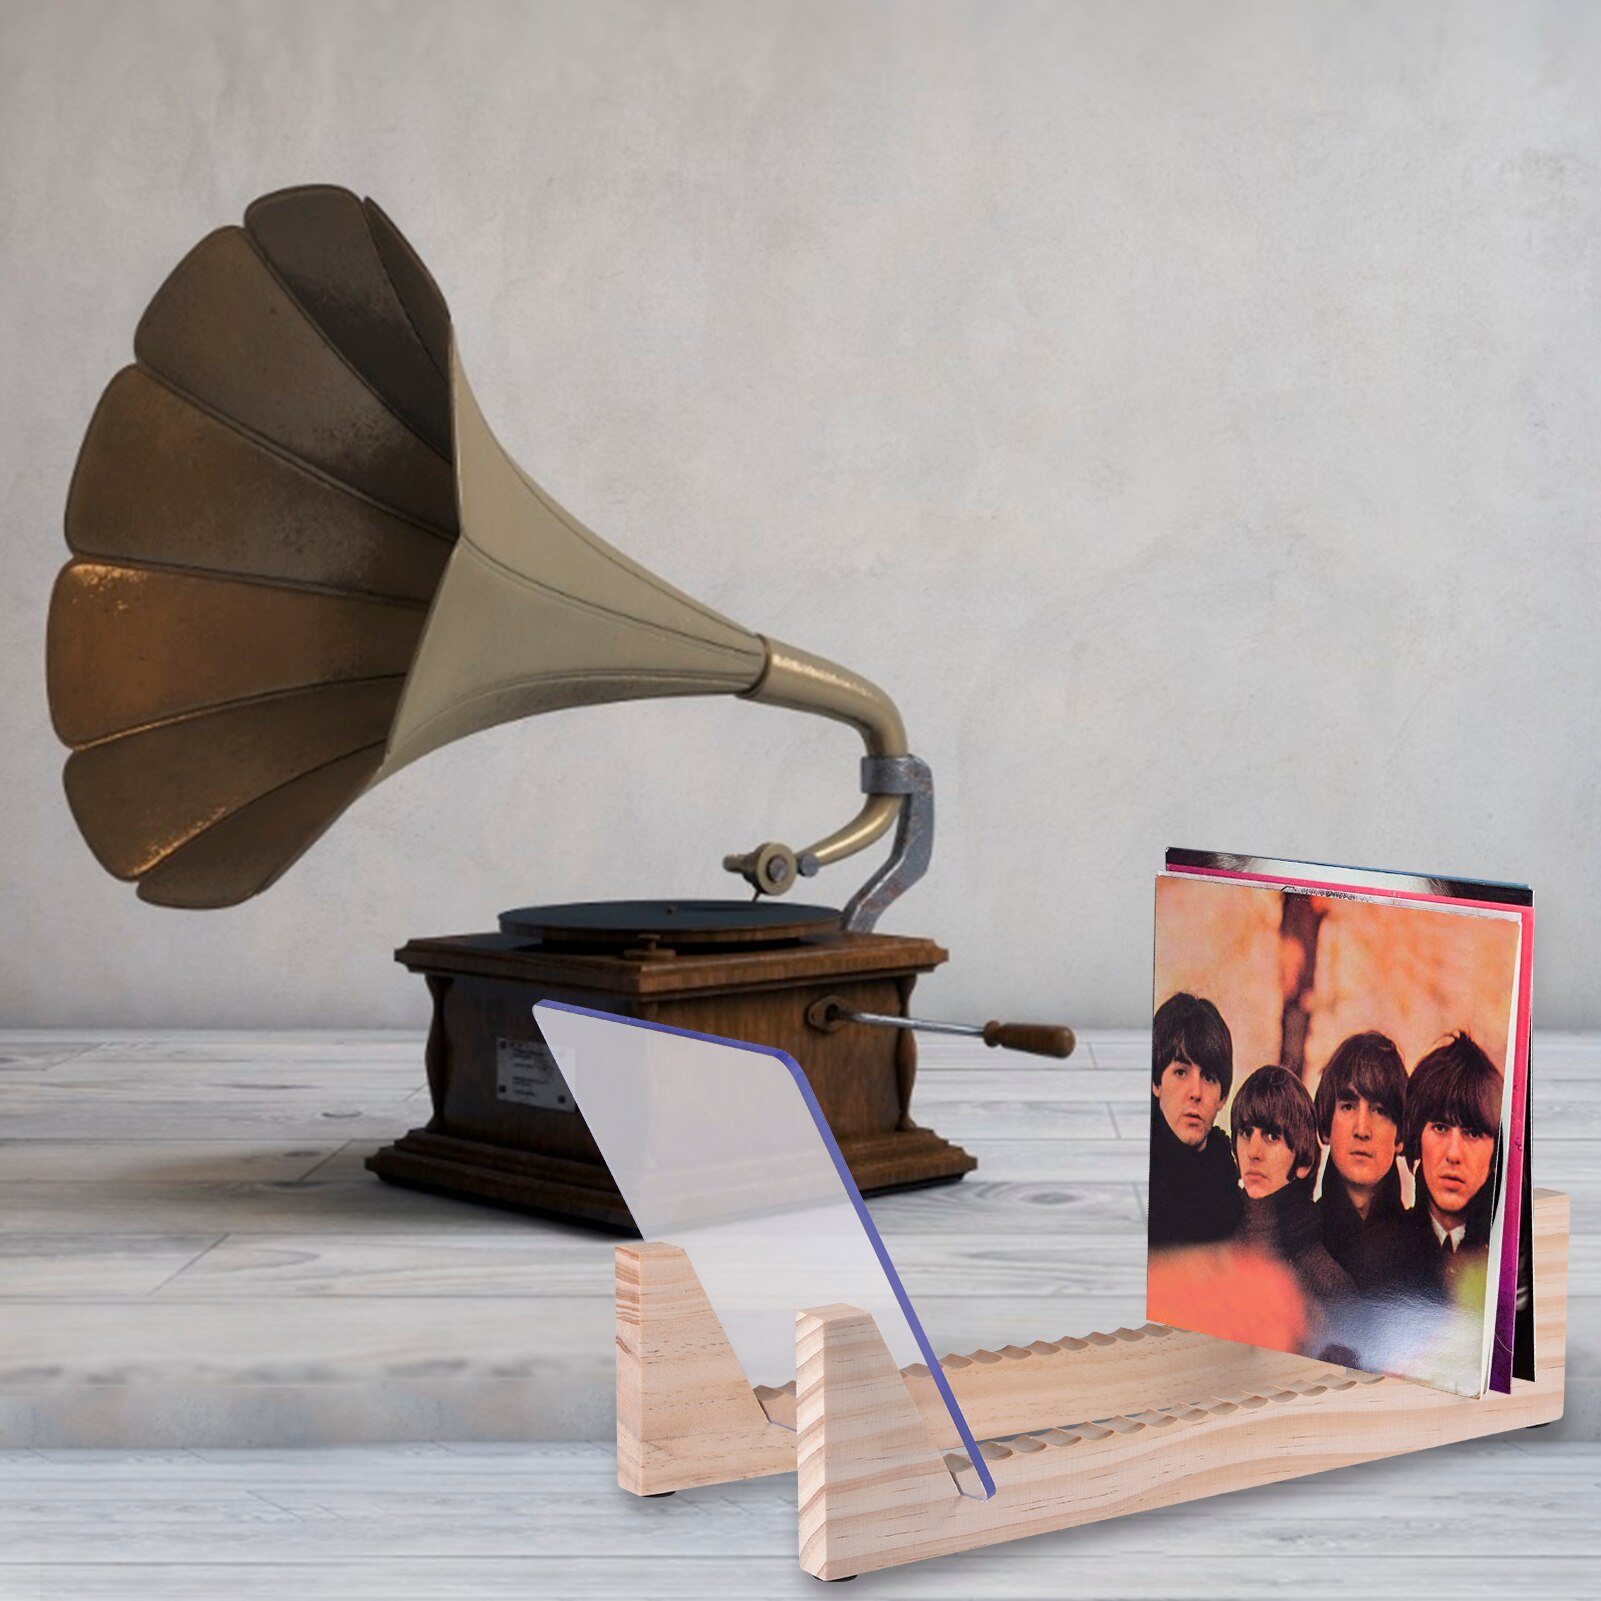 Vinyl Record Storage Holder,Acrylic Ends,Display Your Singles And LPs In This Modern Portable Rack Unit Holds Up To 25 Albums